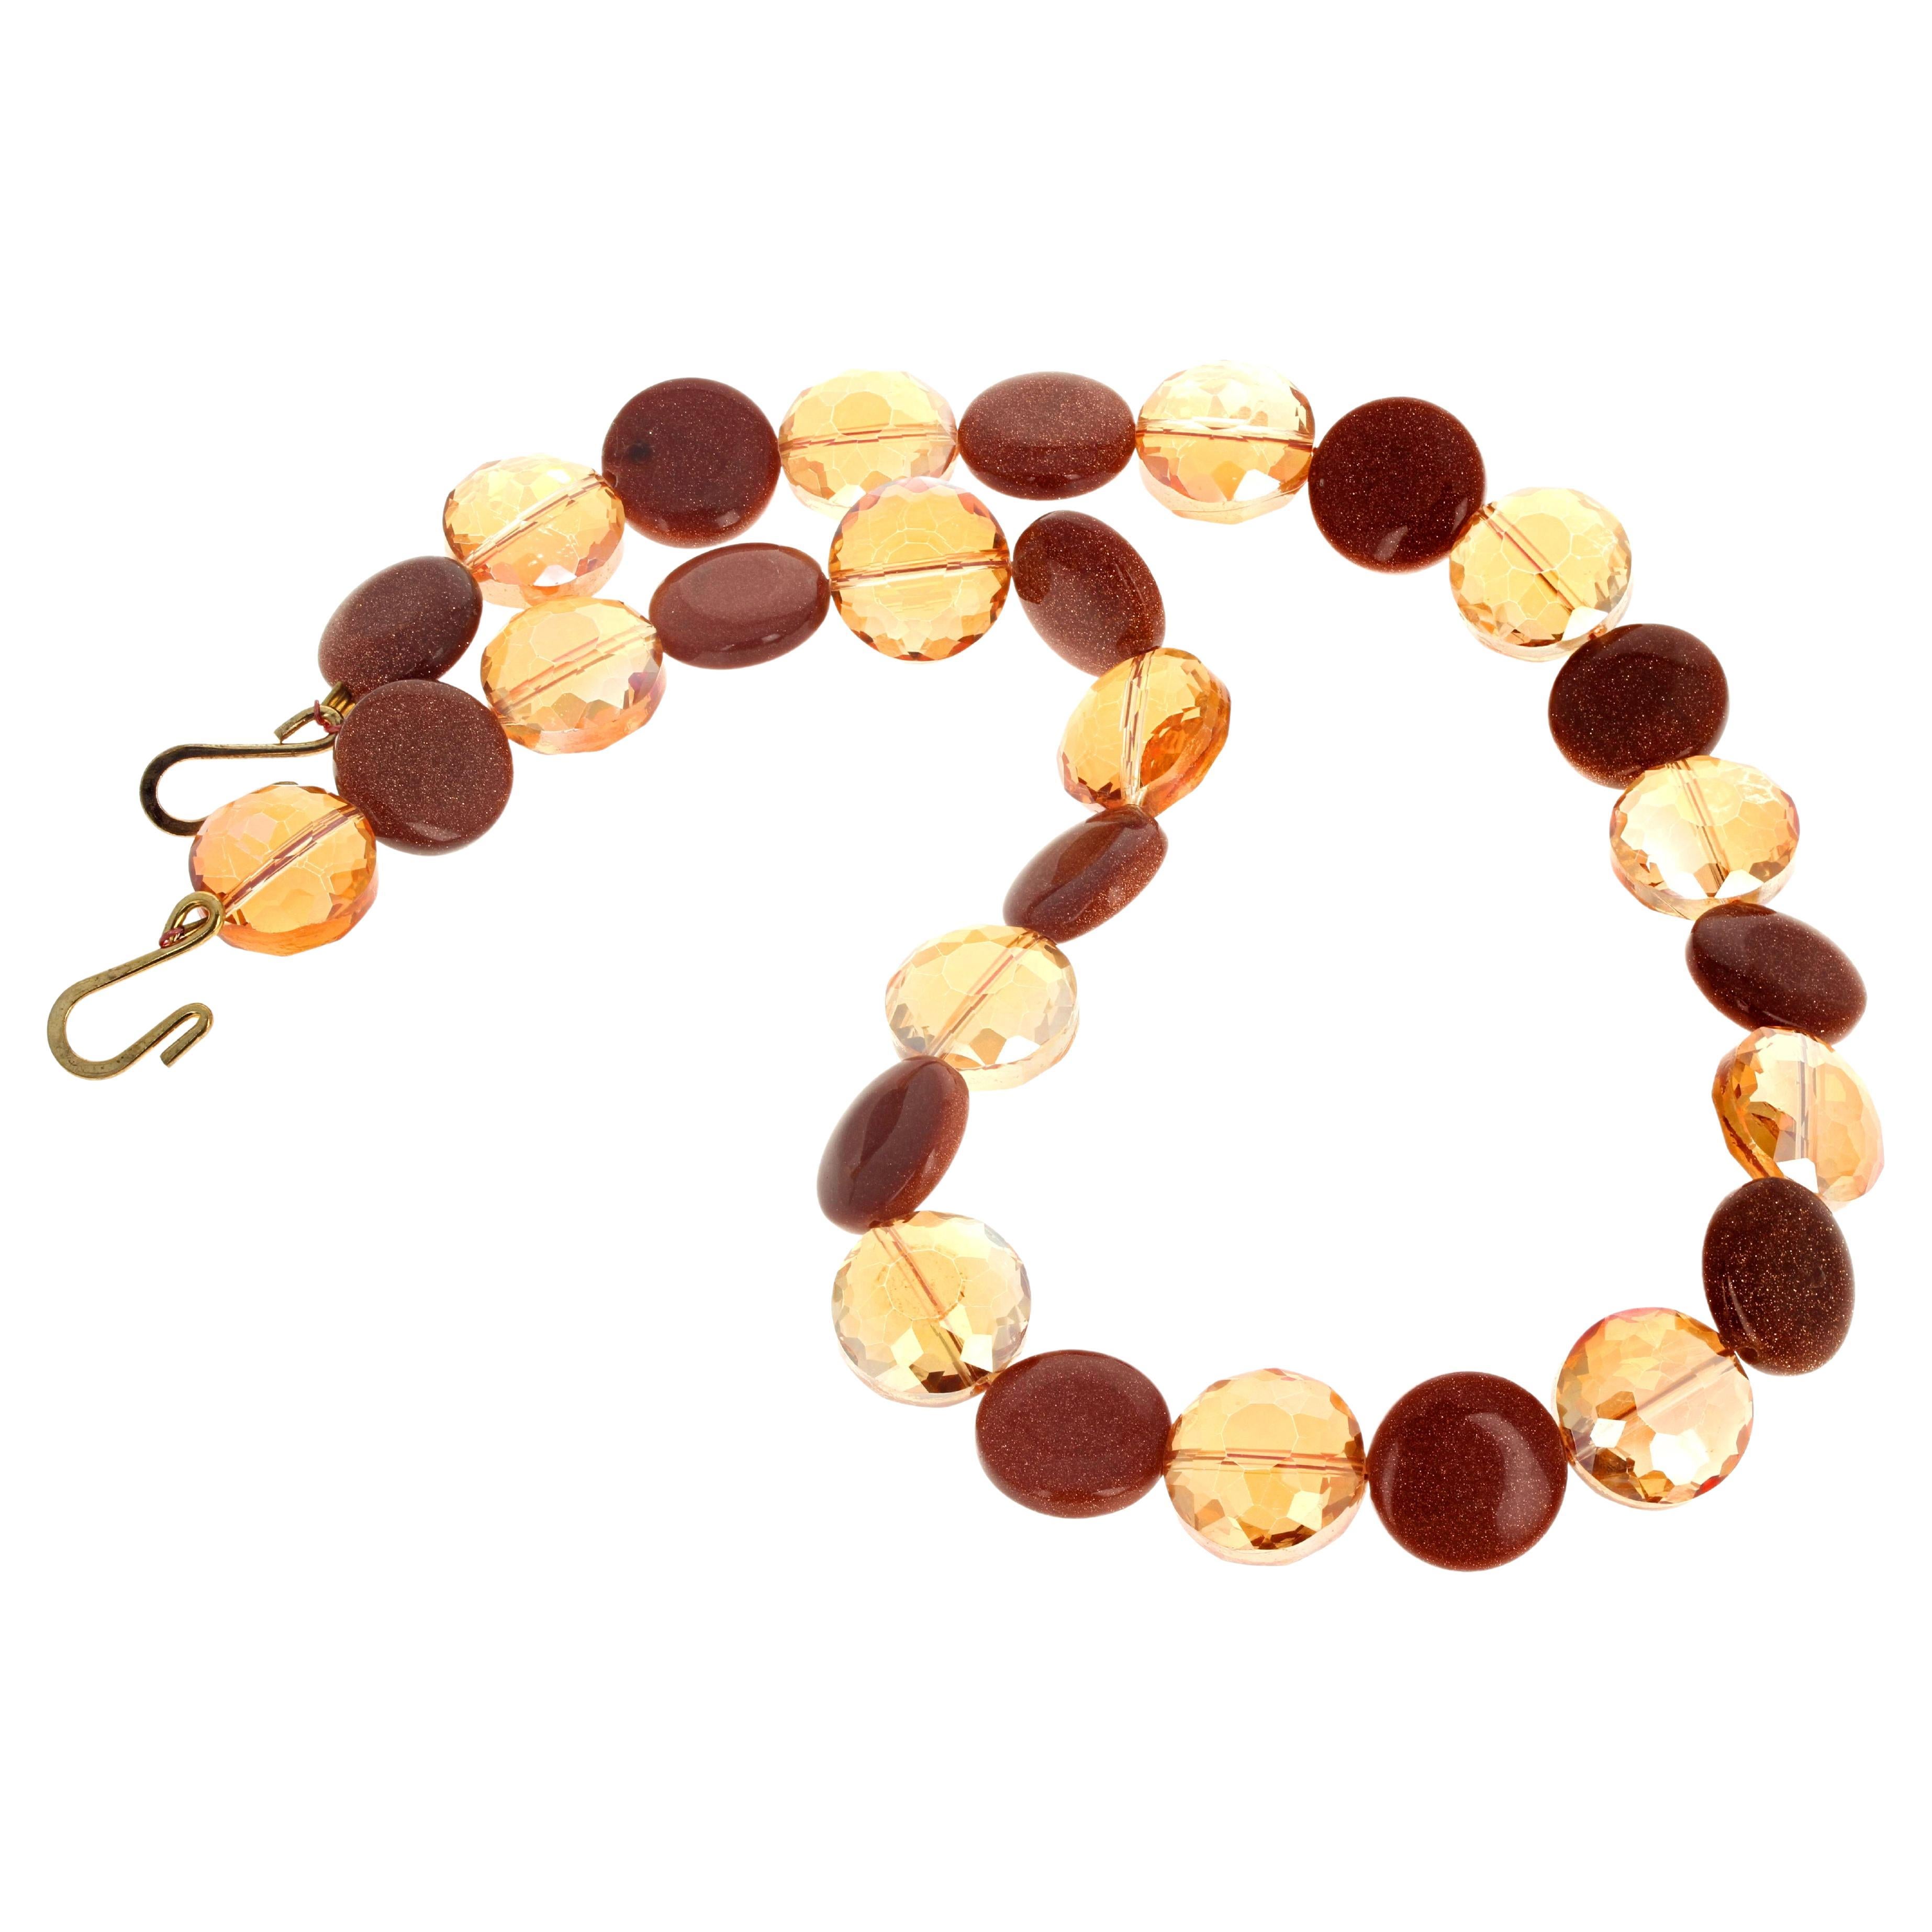 The tiny sparkle in the Brown Goldstone is enhanced by the brilliant goldy coated translucent Quartz in the 16 inches long necklace.  They are all 14mm and the clasp is an easy to use gold plated hook clasp.  